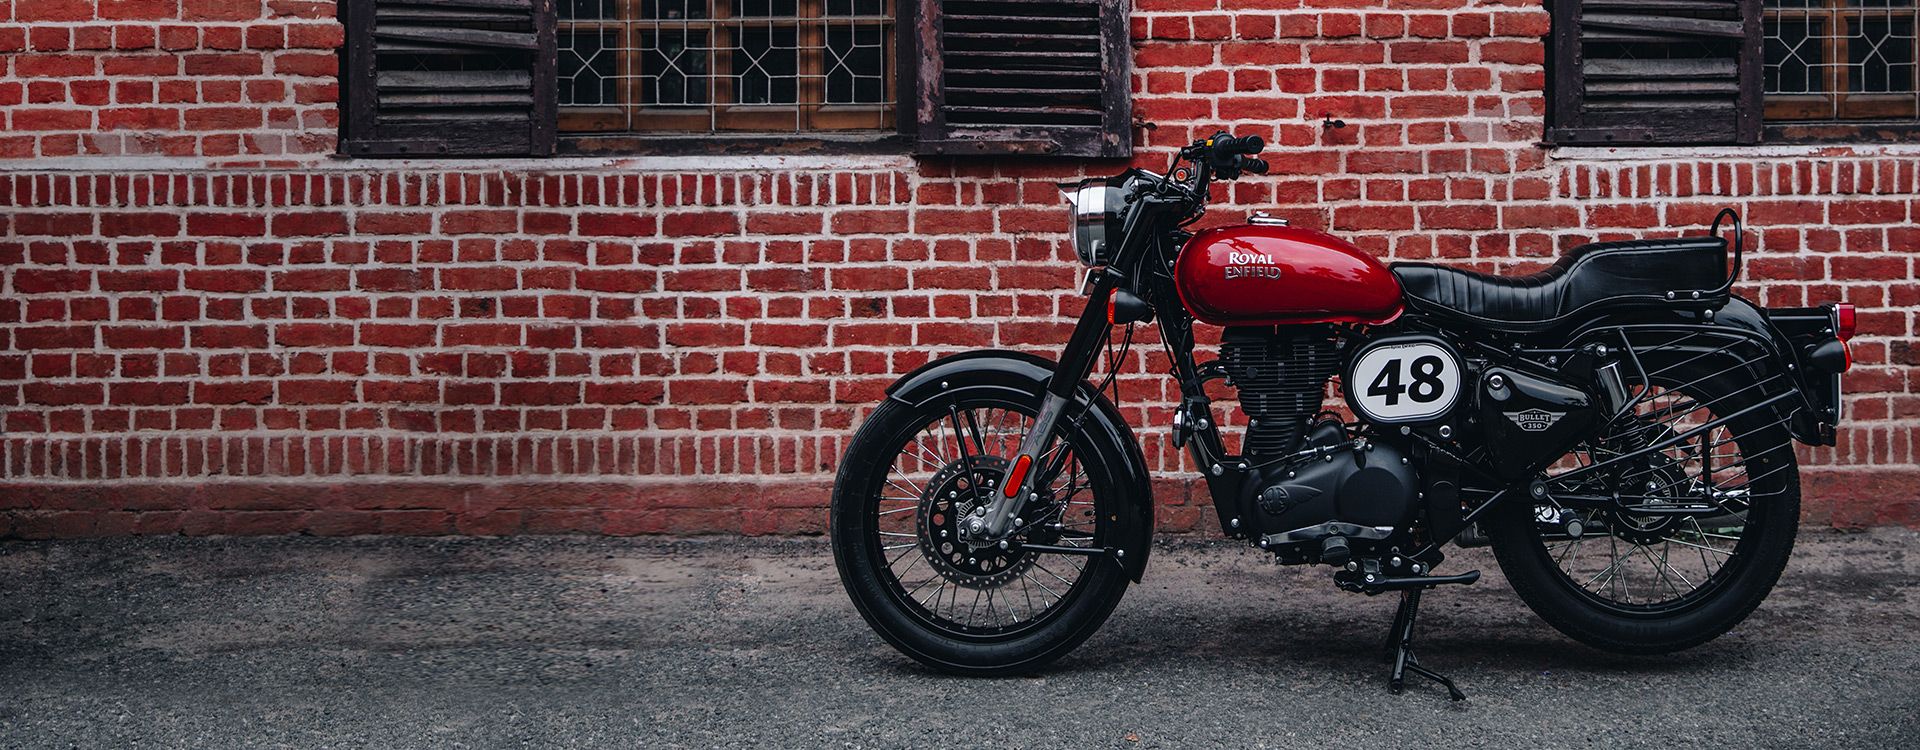 Bullet 350 ES, Specifications, Reviews, Gallery. Royal Enfield